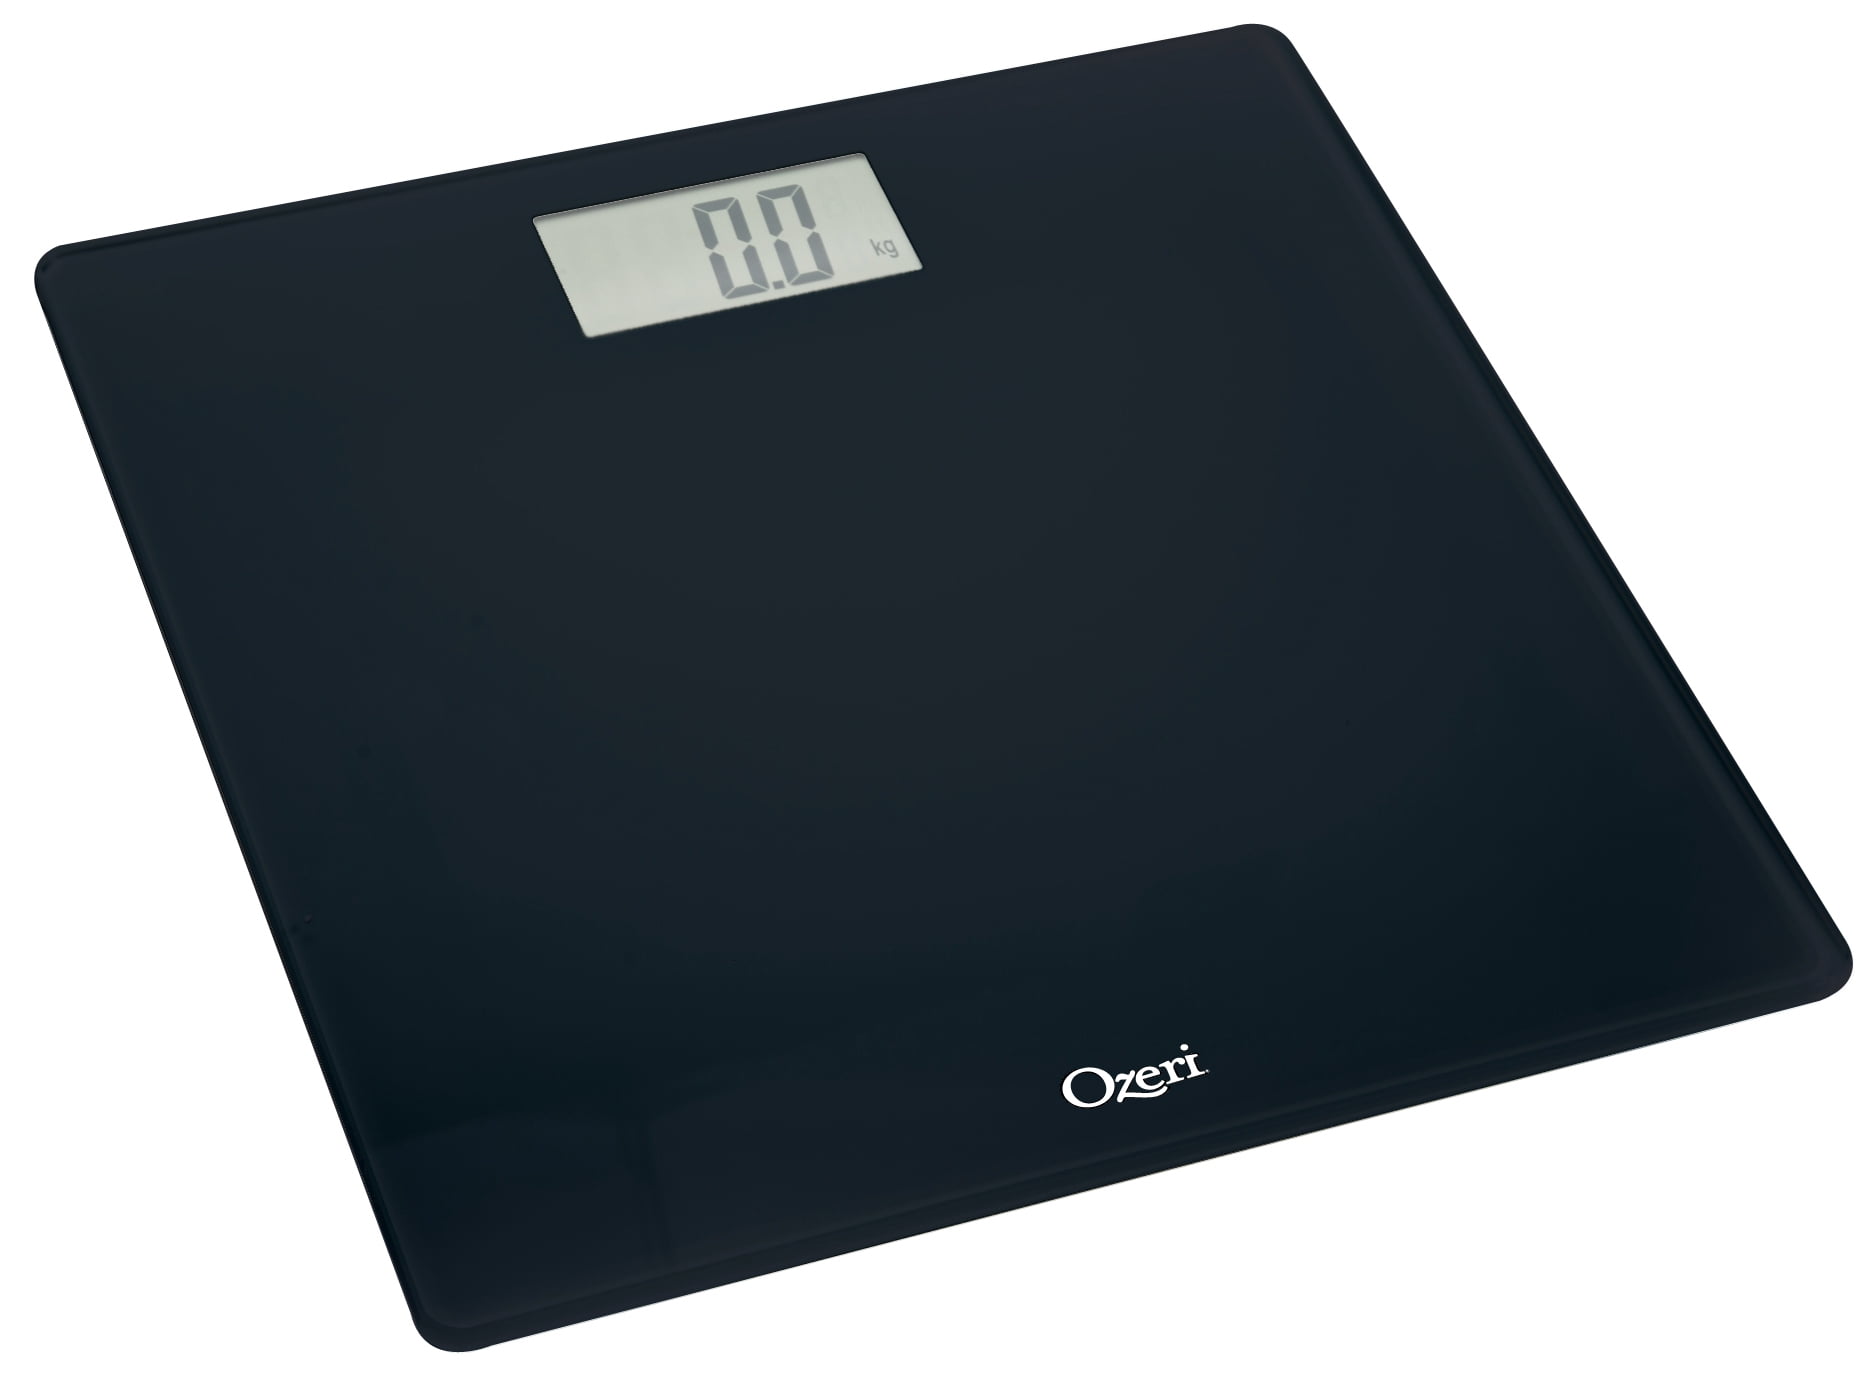 Digital Bathroom Body Weight Tempered Glass 400lbs Scale Electronic LCD Display 